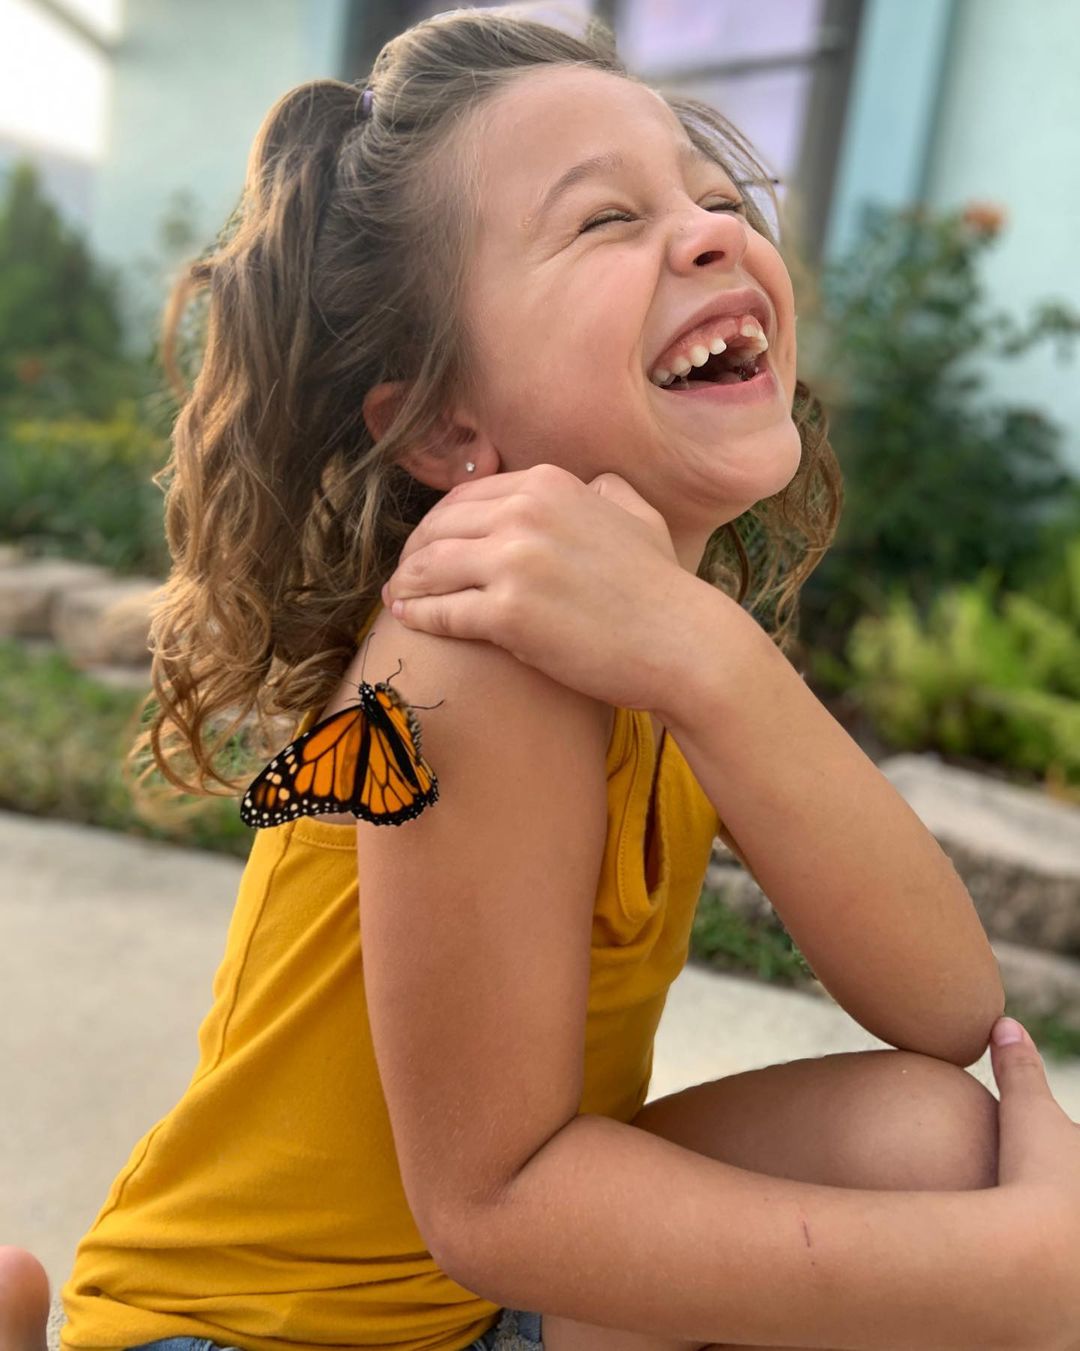 Little Girl Laughing with a Butterfly on her Arm. Photo by Instagram user @butterflyworldflorida